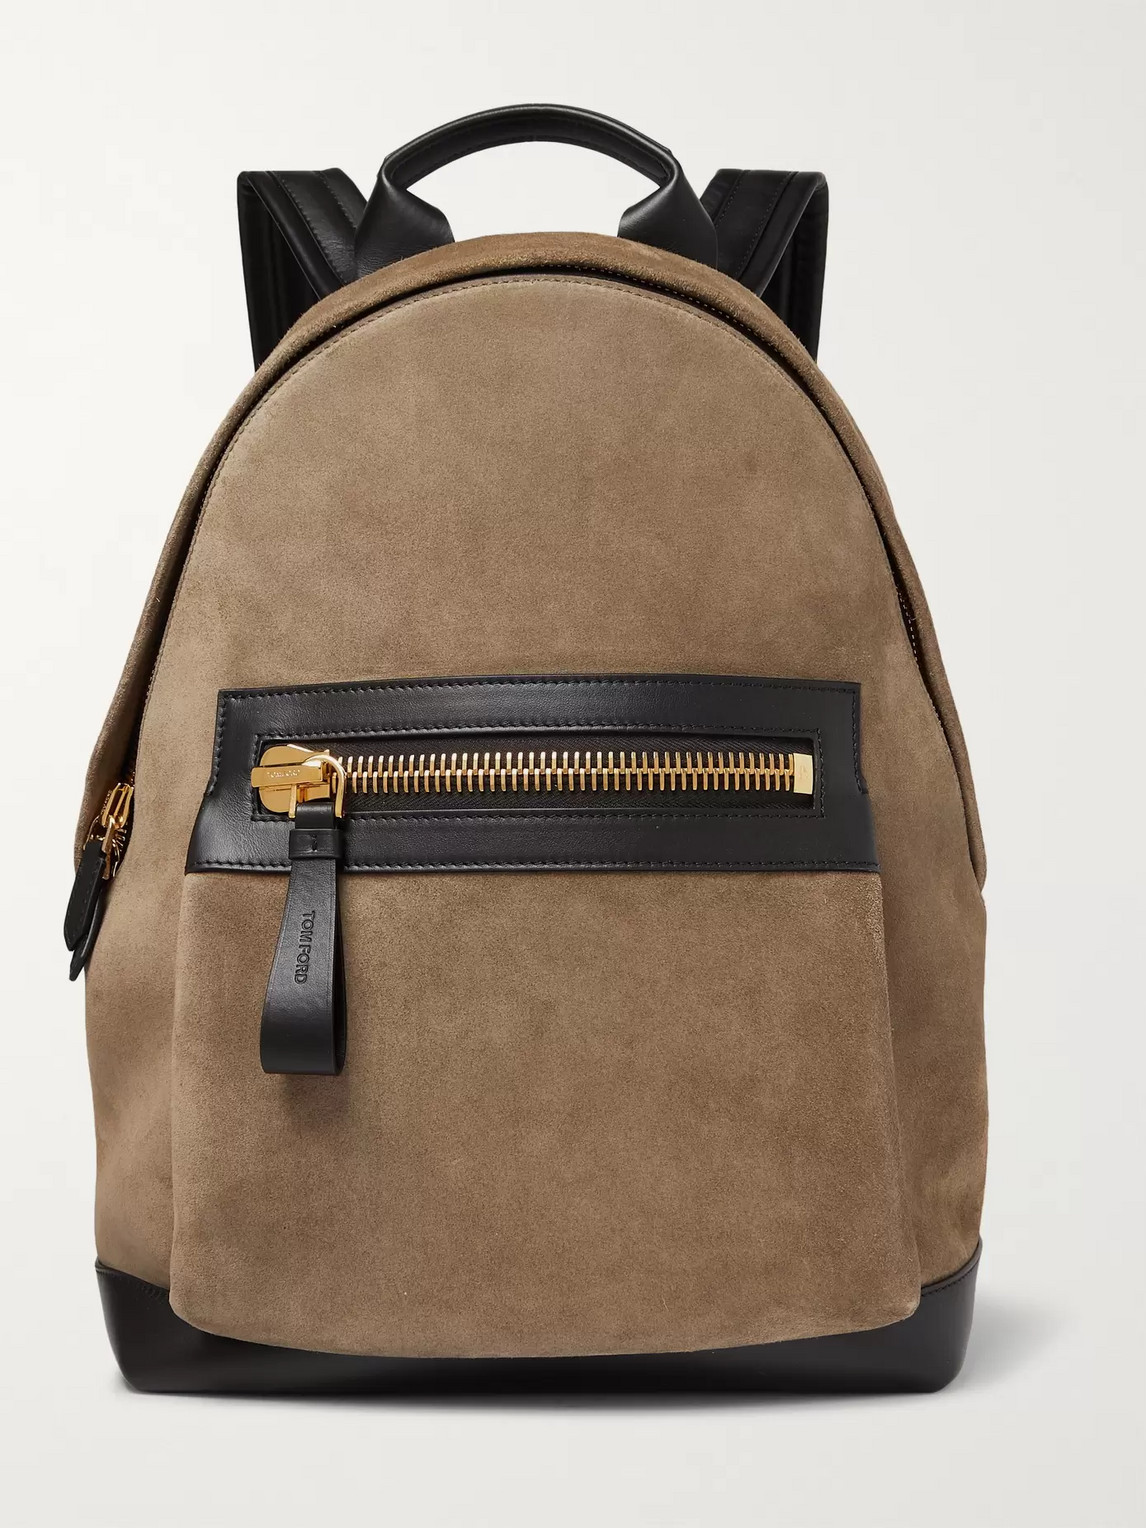 TOM FORD SUEDE AND LEATHER BACKPACK